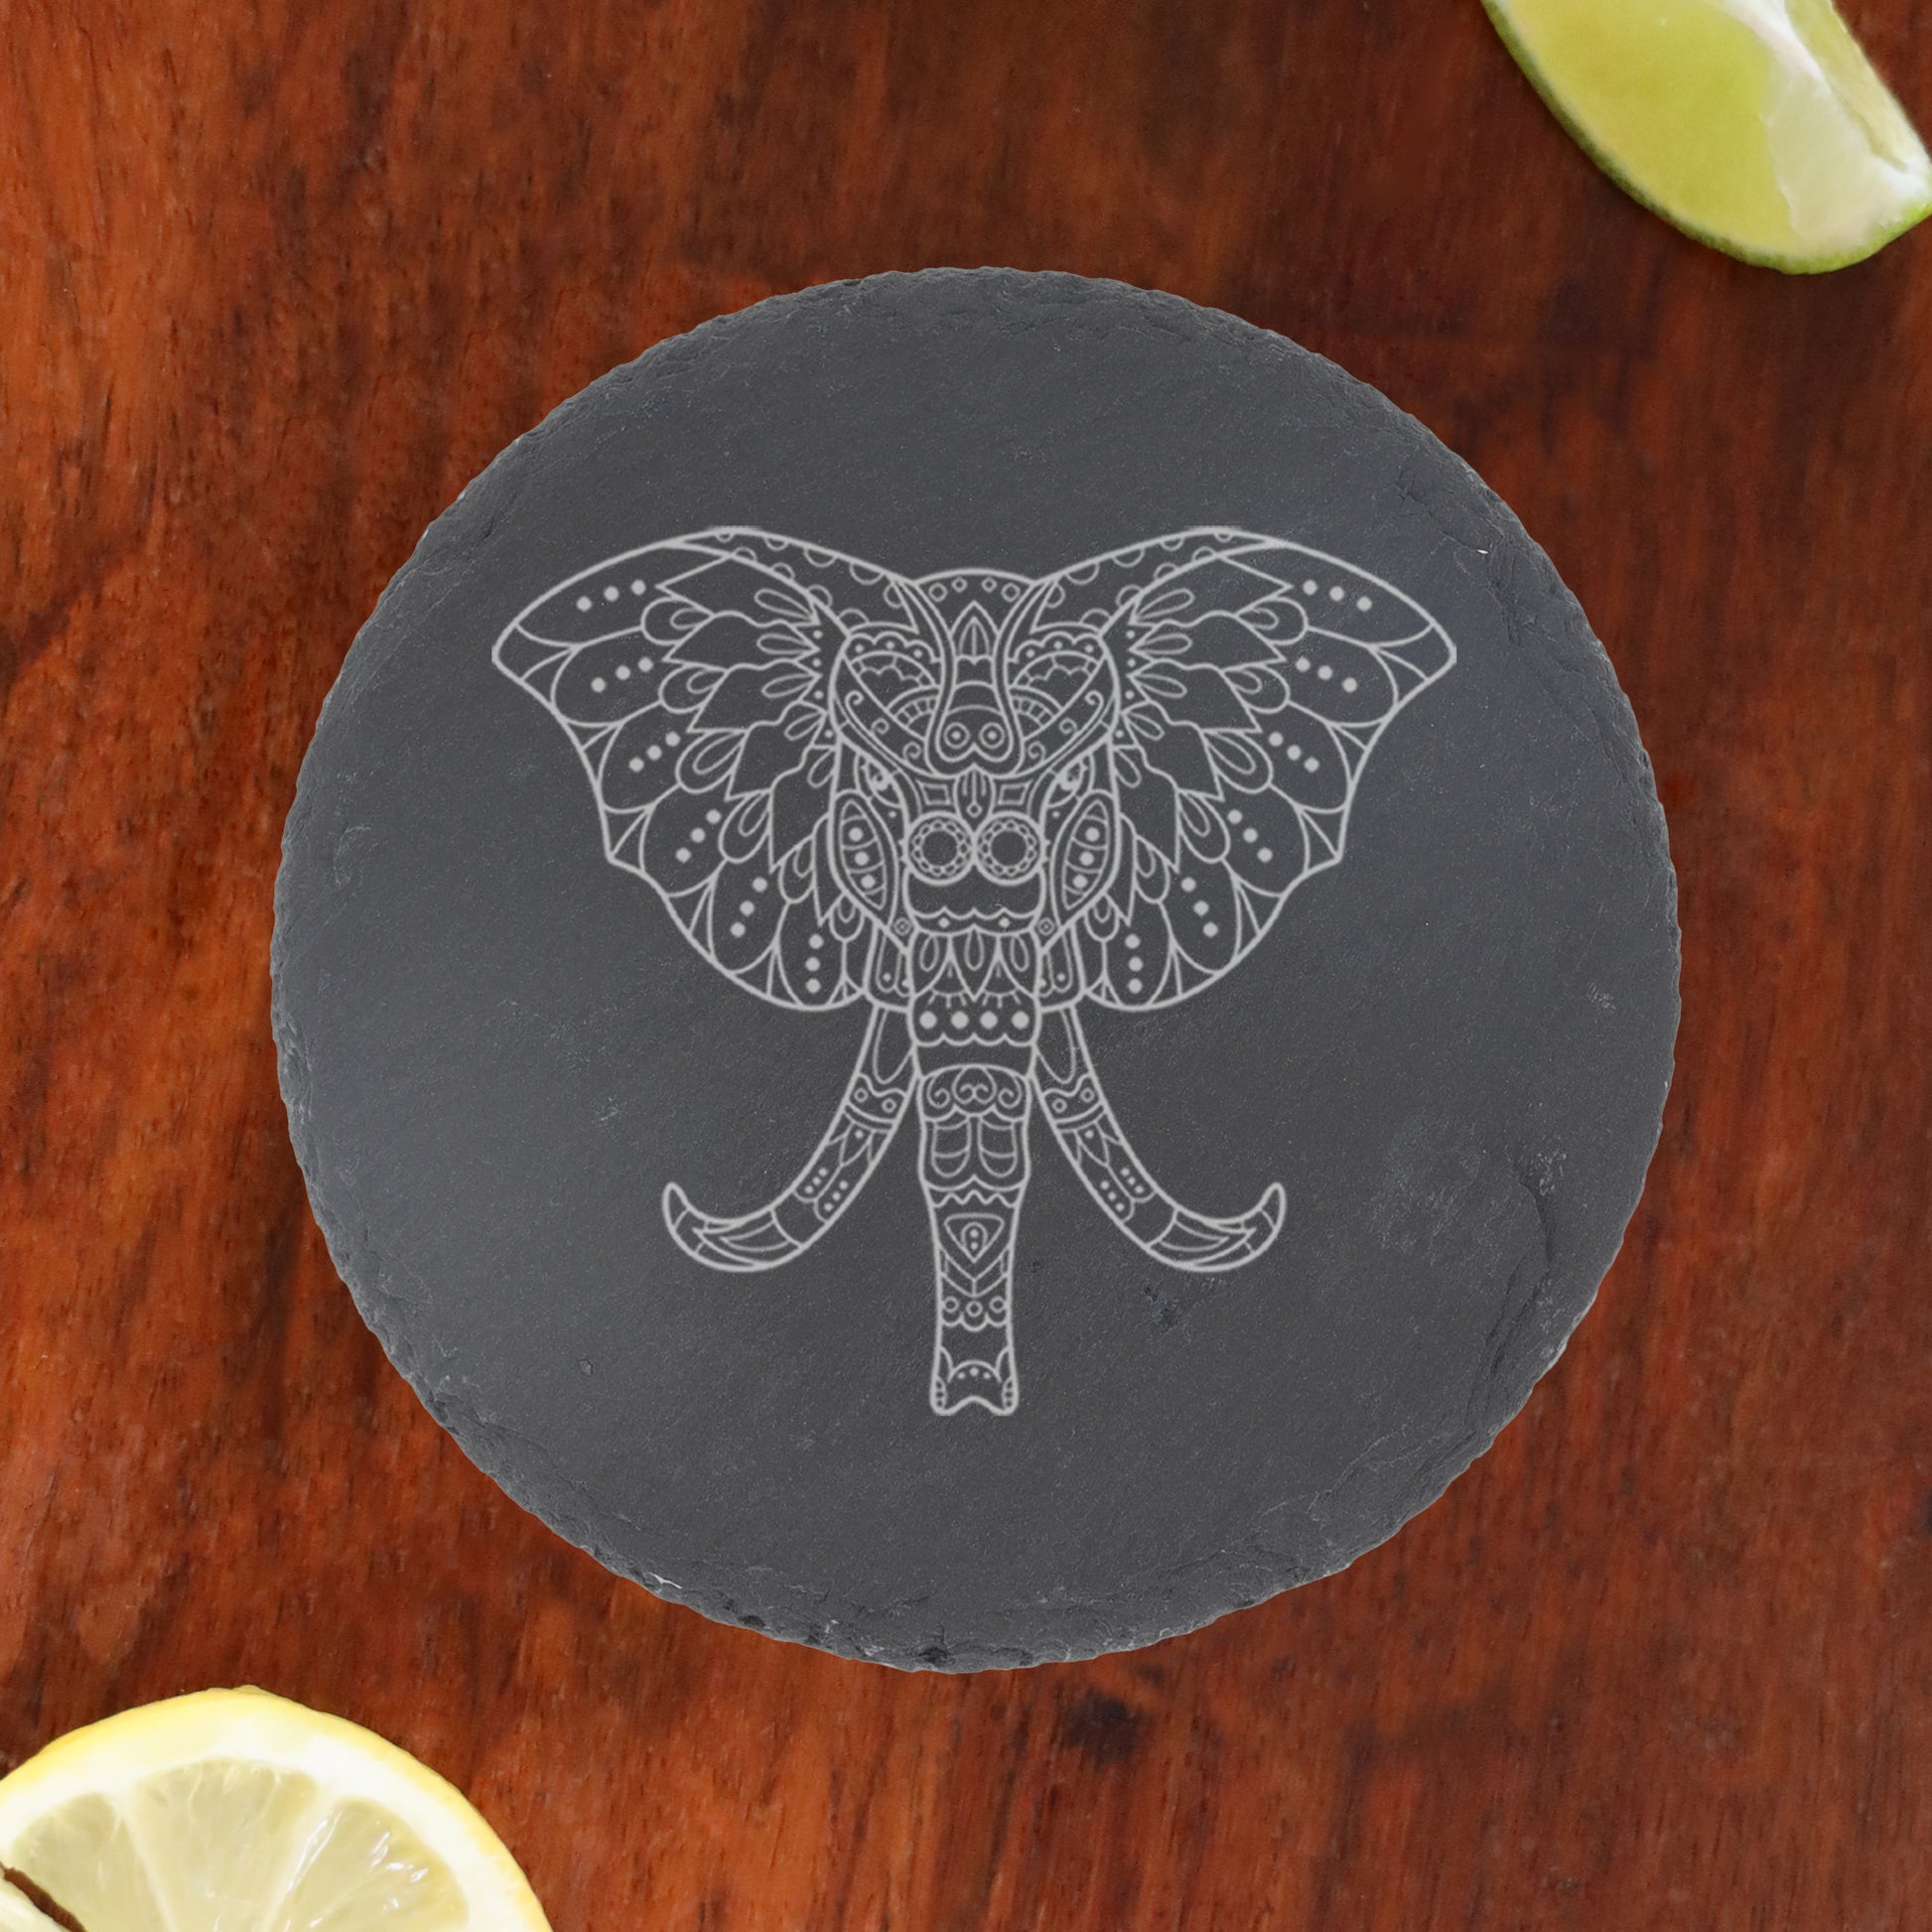 Elephant Mandala Engraved Beer Glass and/or Coaster Set  - Always Looking Good - Round Coaster Only  